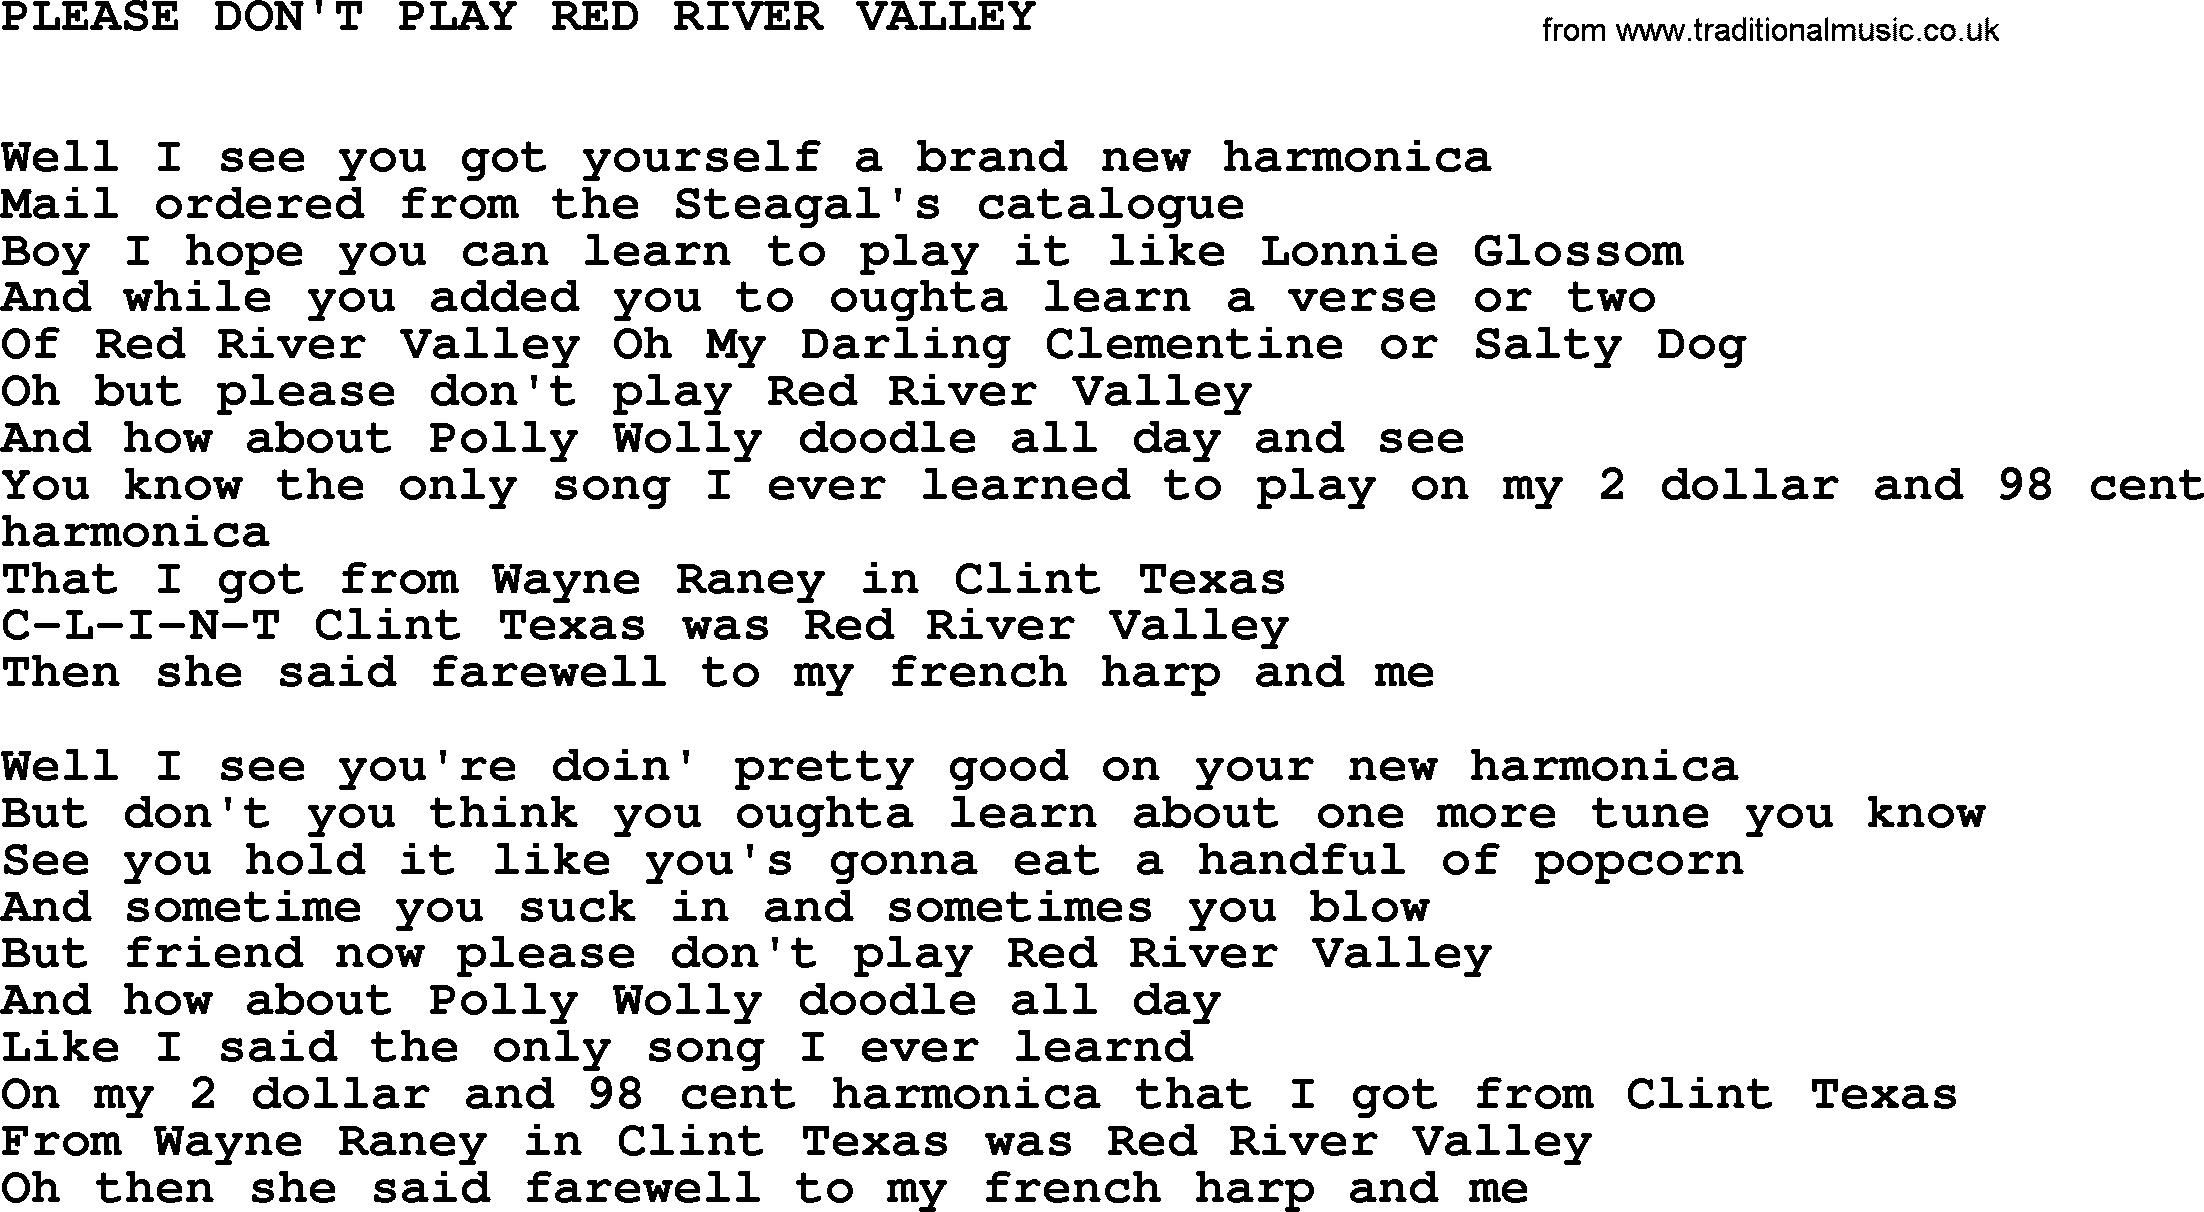 Johnny Cash song Please Don't Play Red River Valley.txt lyrics